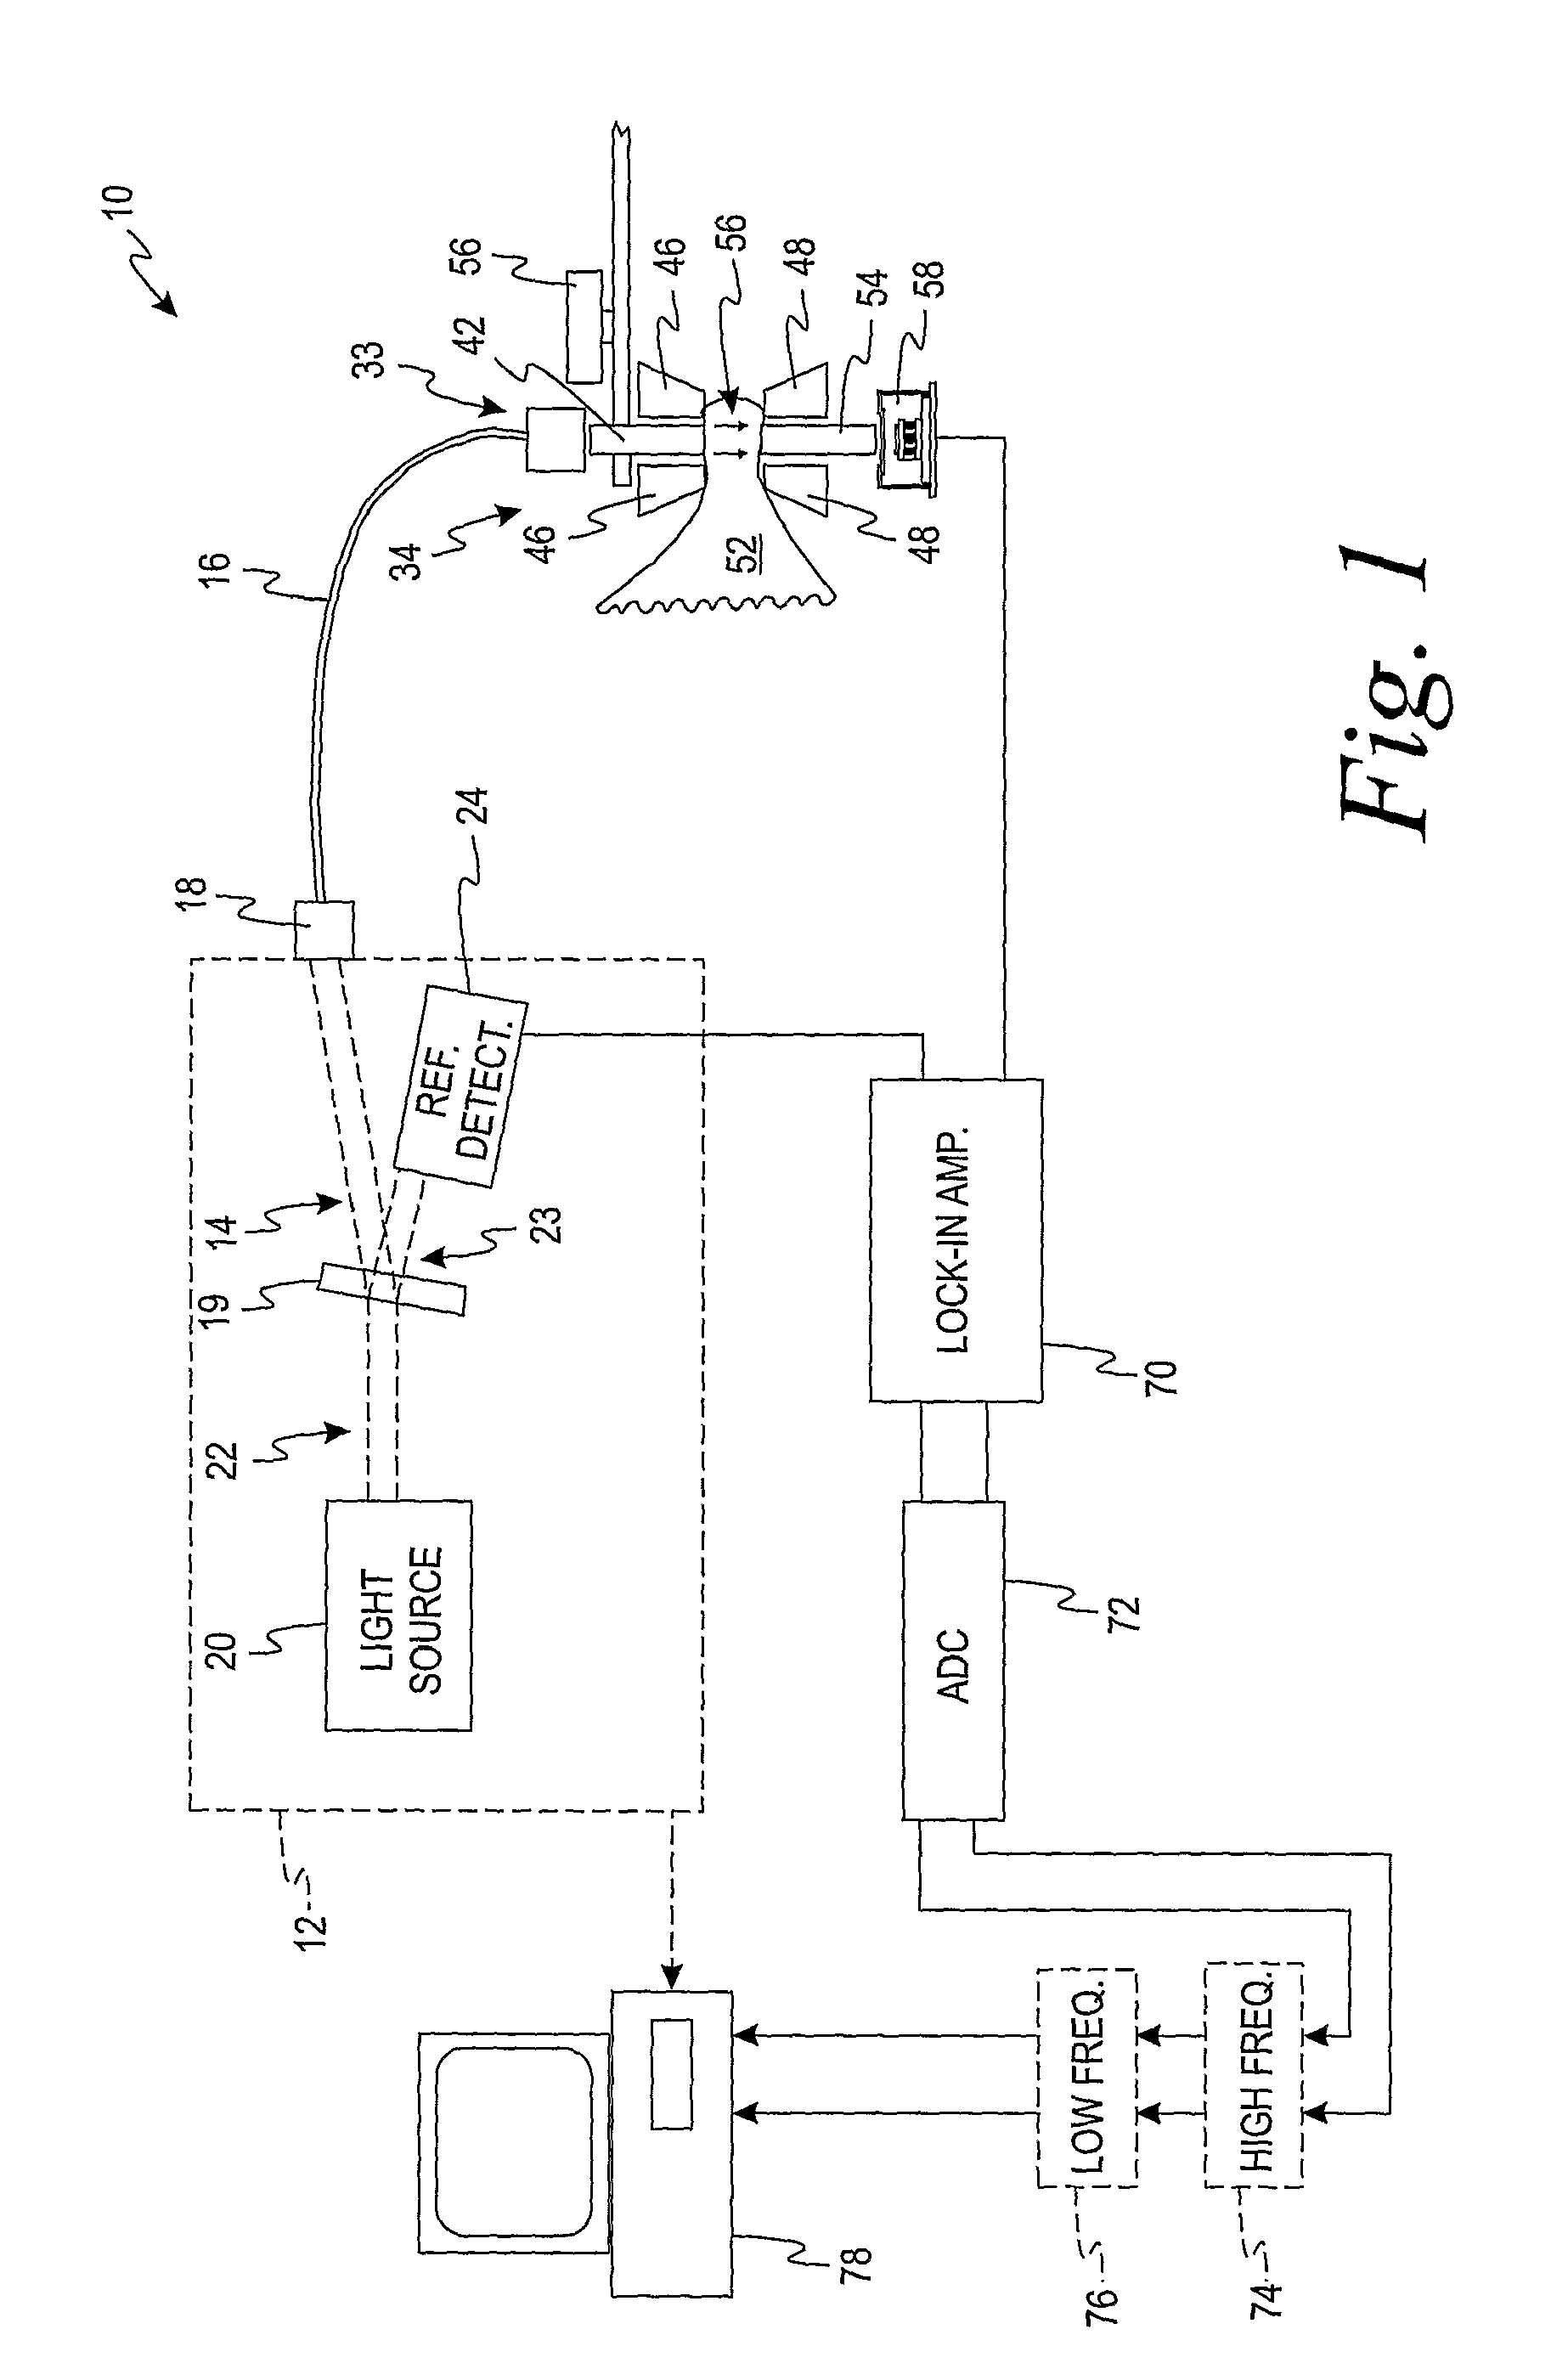 Non-invasive system and method for measuring an analyte in the body